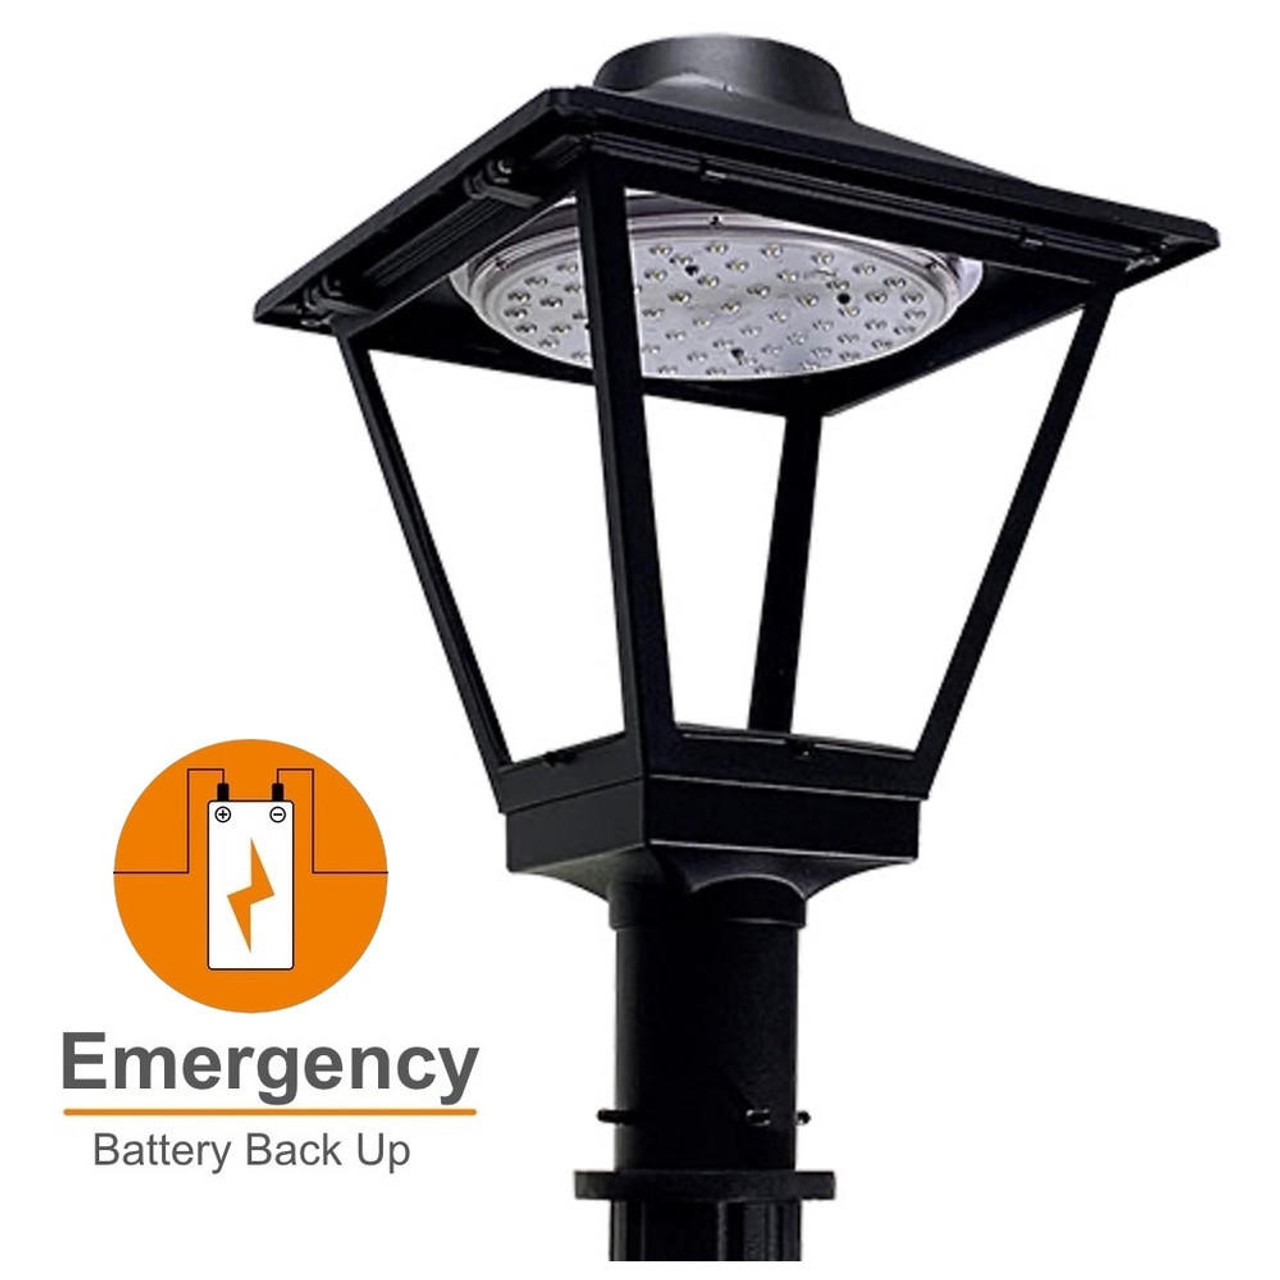 https://cdn11.bigcommerce.com/s-o7p3kkw0ib/images/stencil/1280x1280/products/66185/135442/lbs-lighting-led-post-top-coach-lantern-street-light-with-battery-back-up__08690.1678406329.jpg?c=2